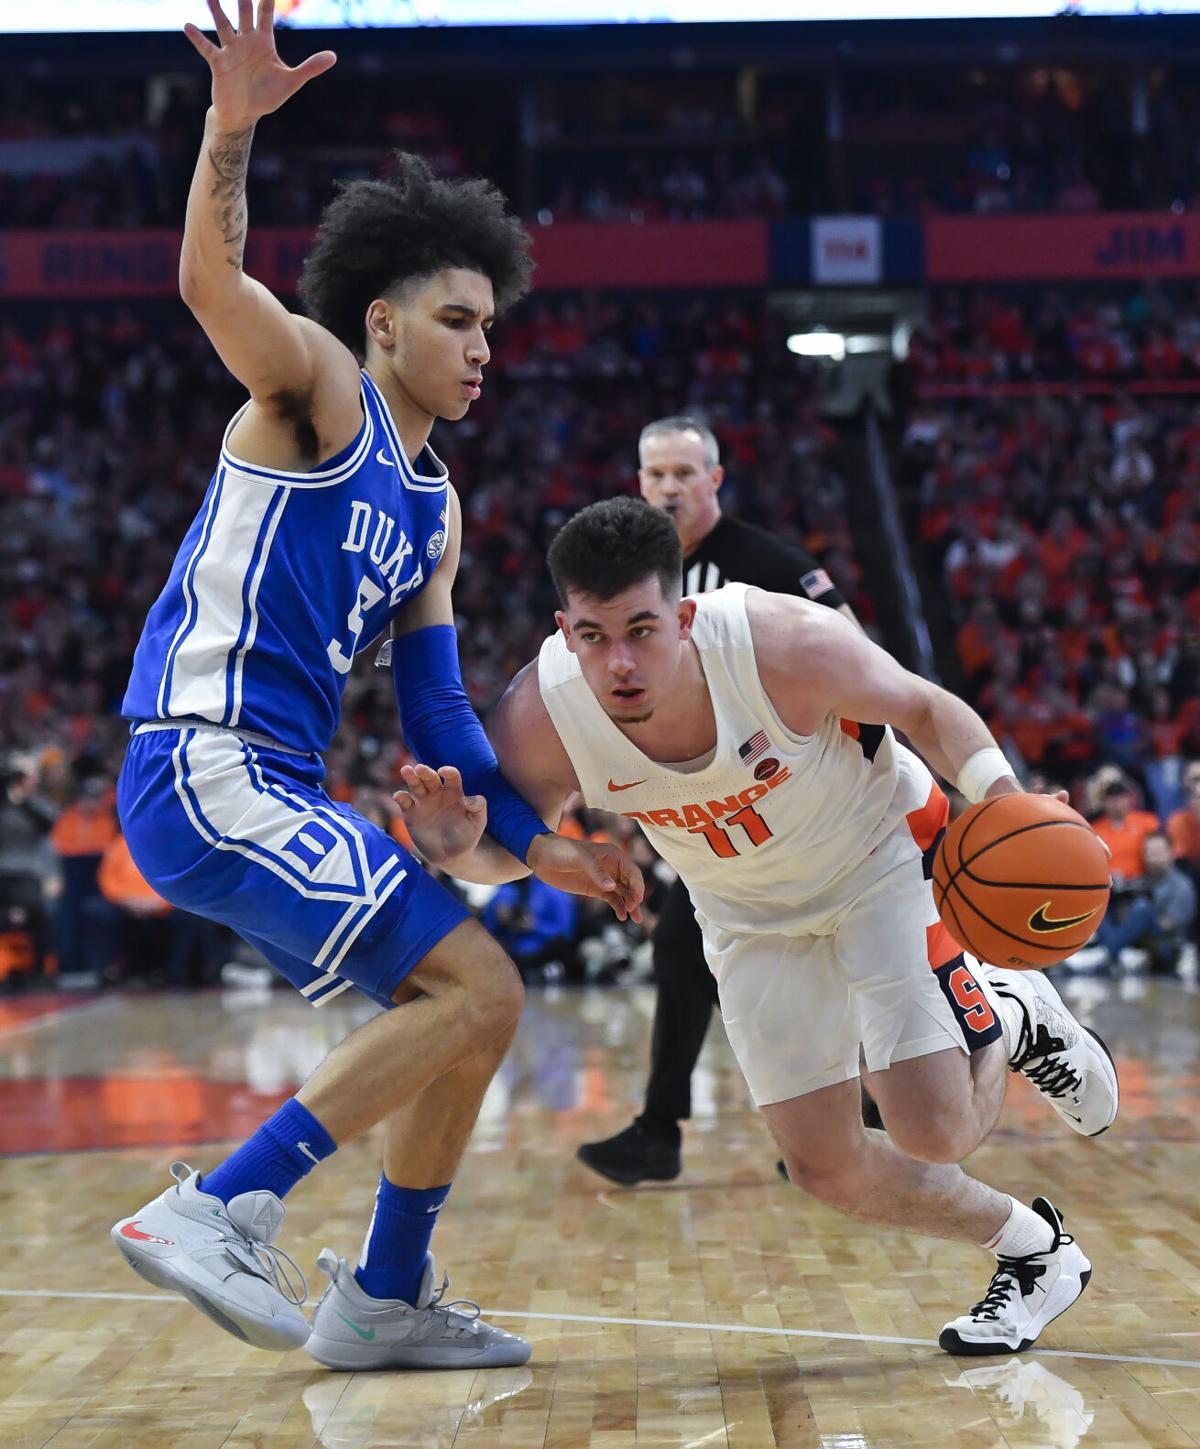 Clemson leading scorer Hall withdraws from NBA draft, returns to Tigers